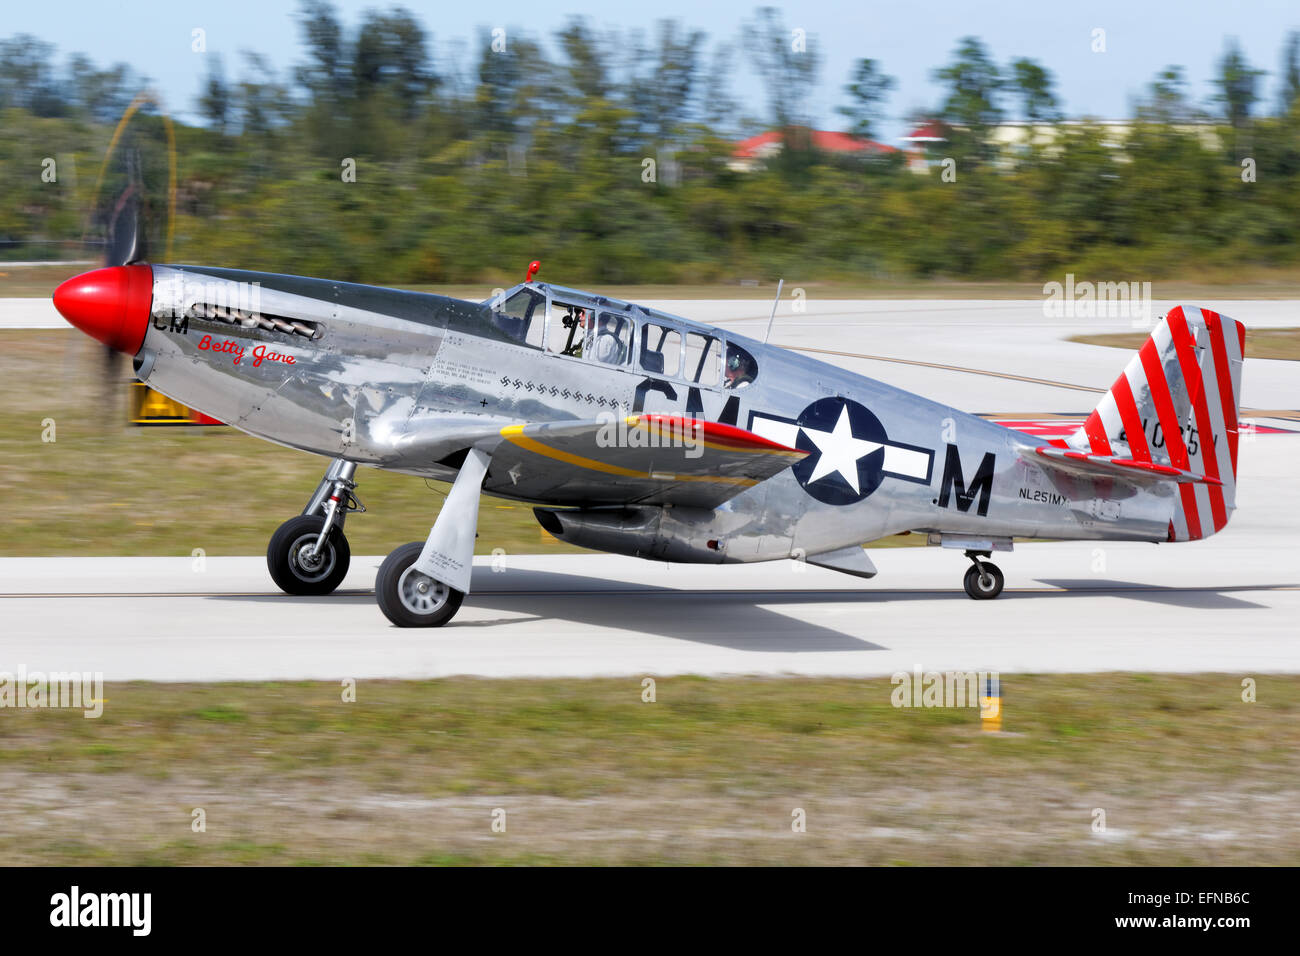 P51 Mustang 'Betty Jane', Collings Foundation, Naples, Florida Banque D'Images